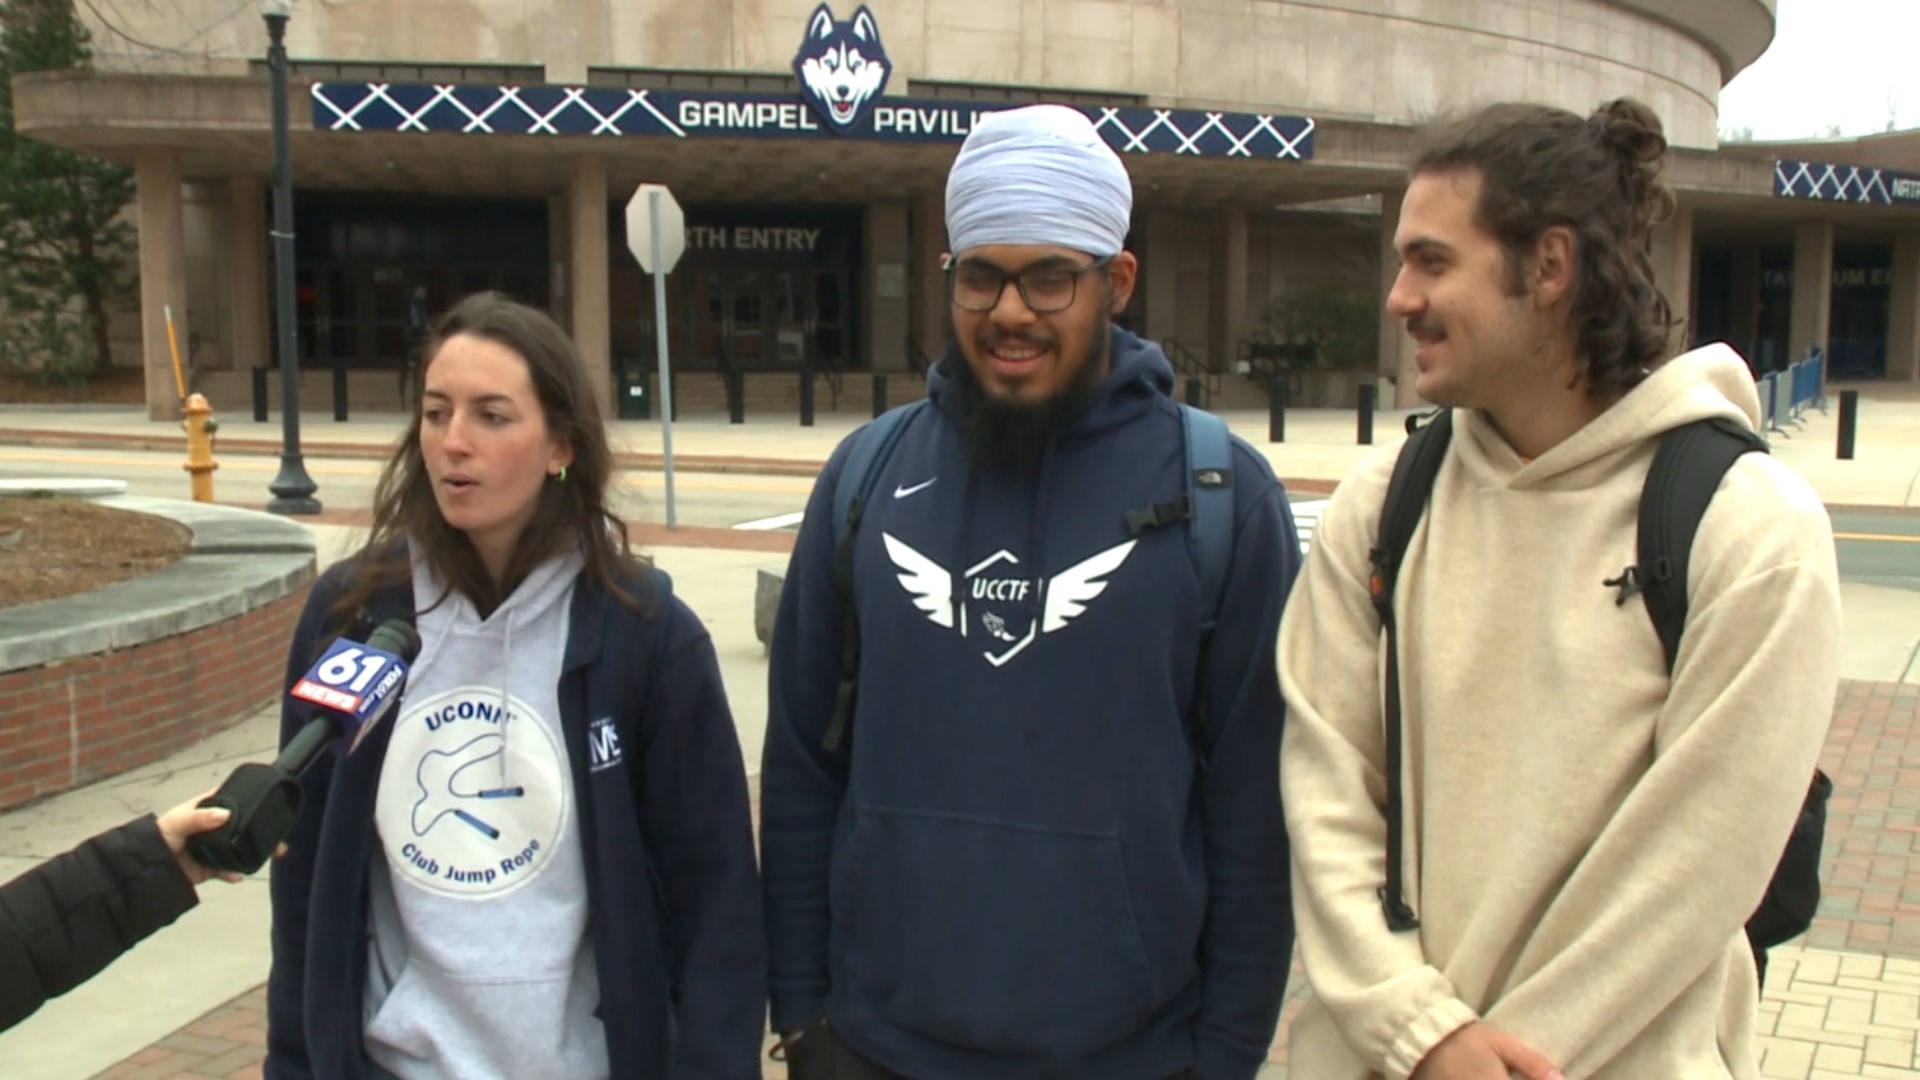 The UConn men's basketball team is heading to the Elite Eight, and the team's classmates at home are cheering them on.